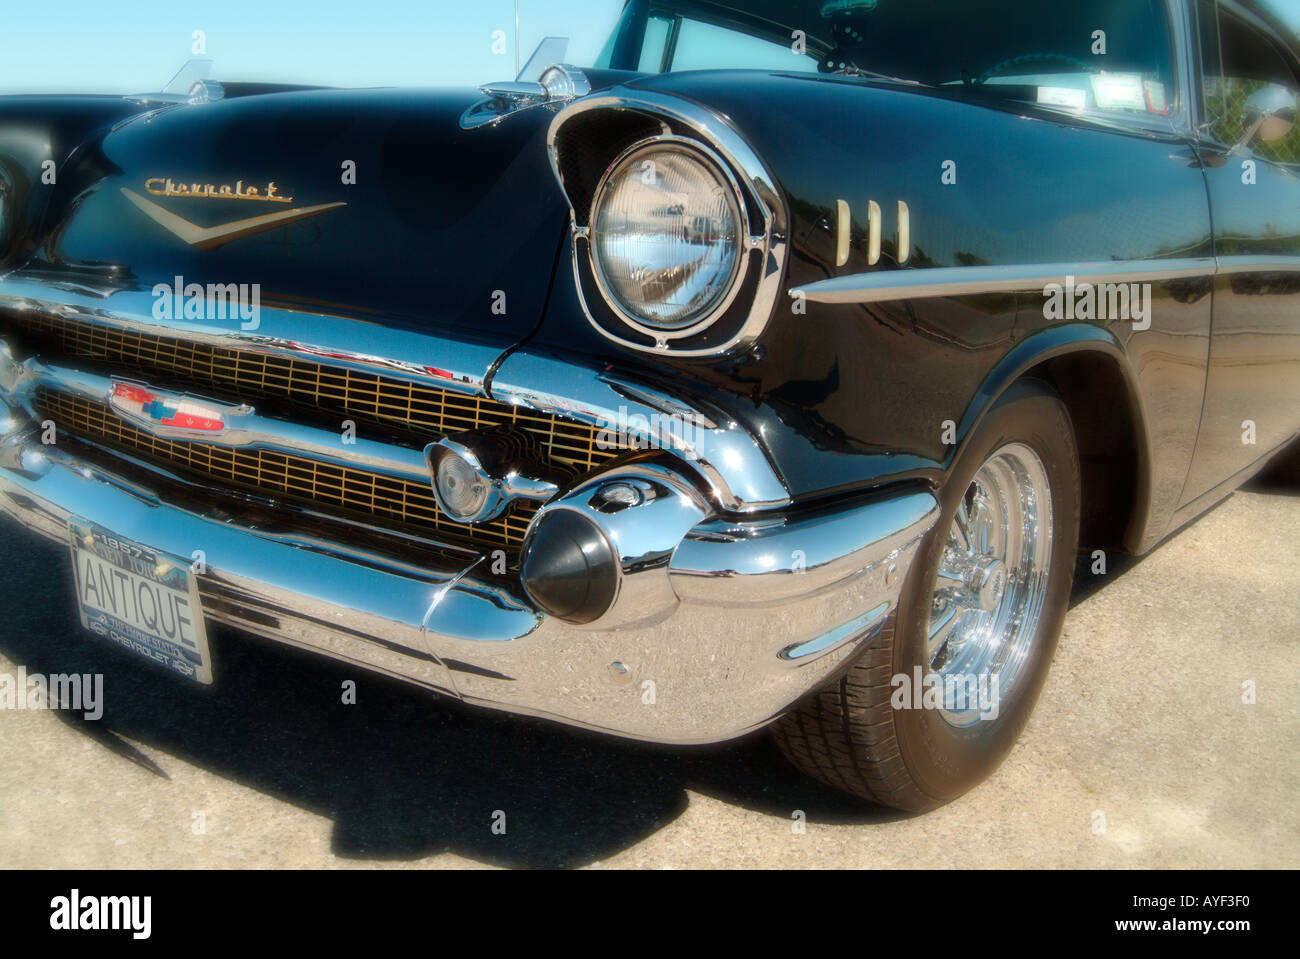 A black 57 Chevy Belair Original license plate number changed to ANTIQUE by the photographer Stock Photo